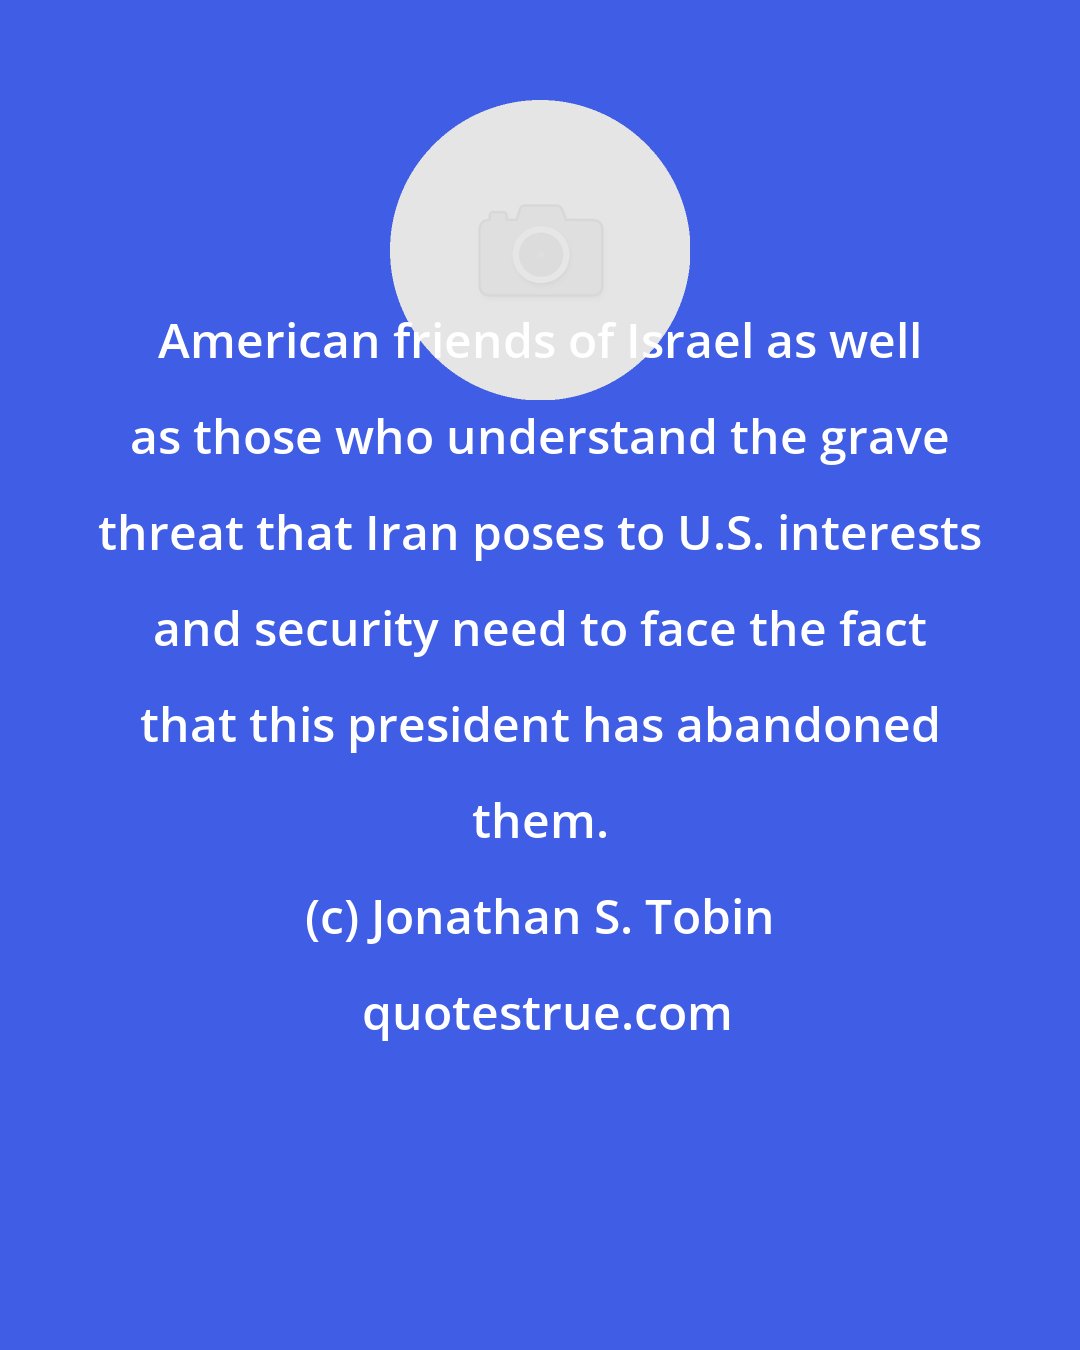 Jonathan S. Tobin: American friends of Israel as well as those who understand the grave threat that Iran poses to U.S. interests and security need to face the fact that this president has abandoned them.